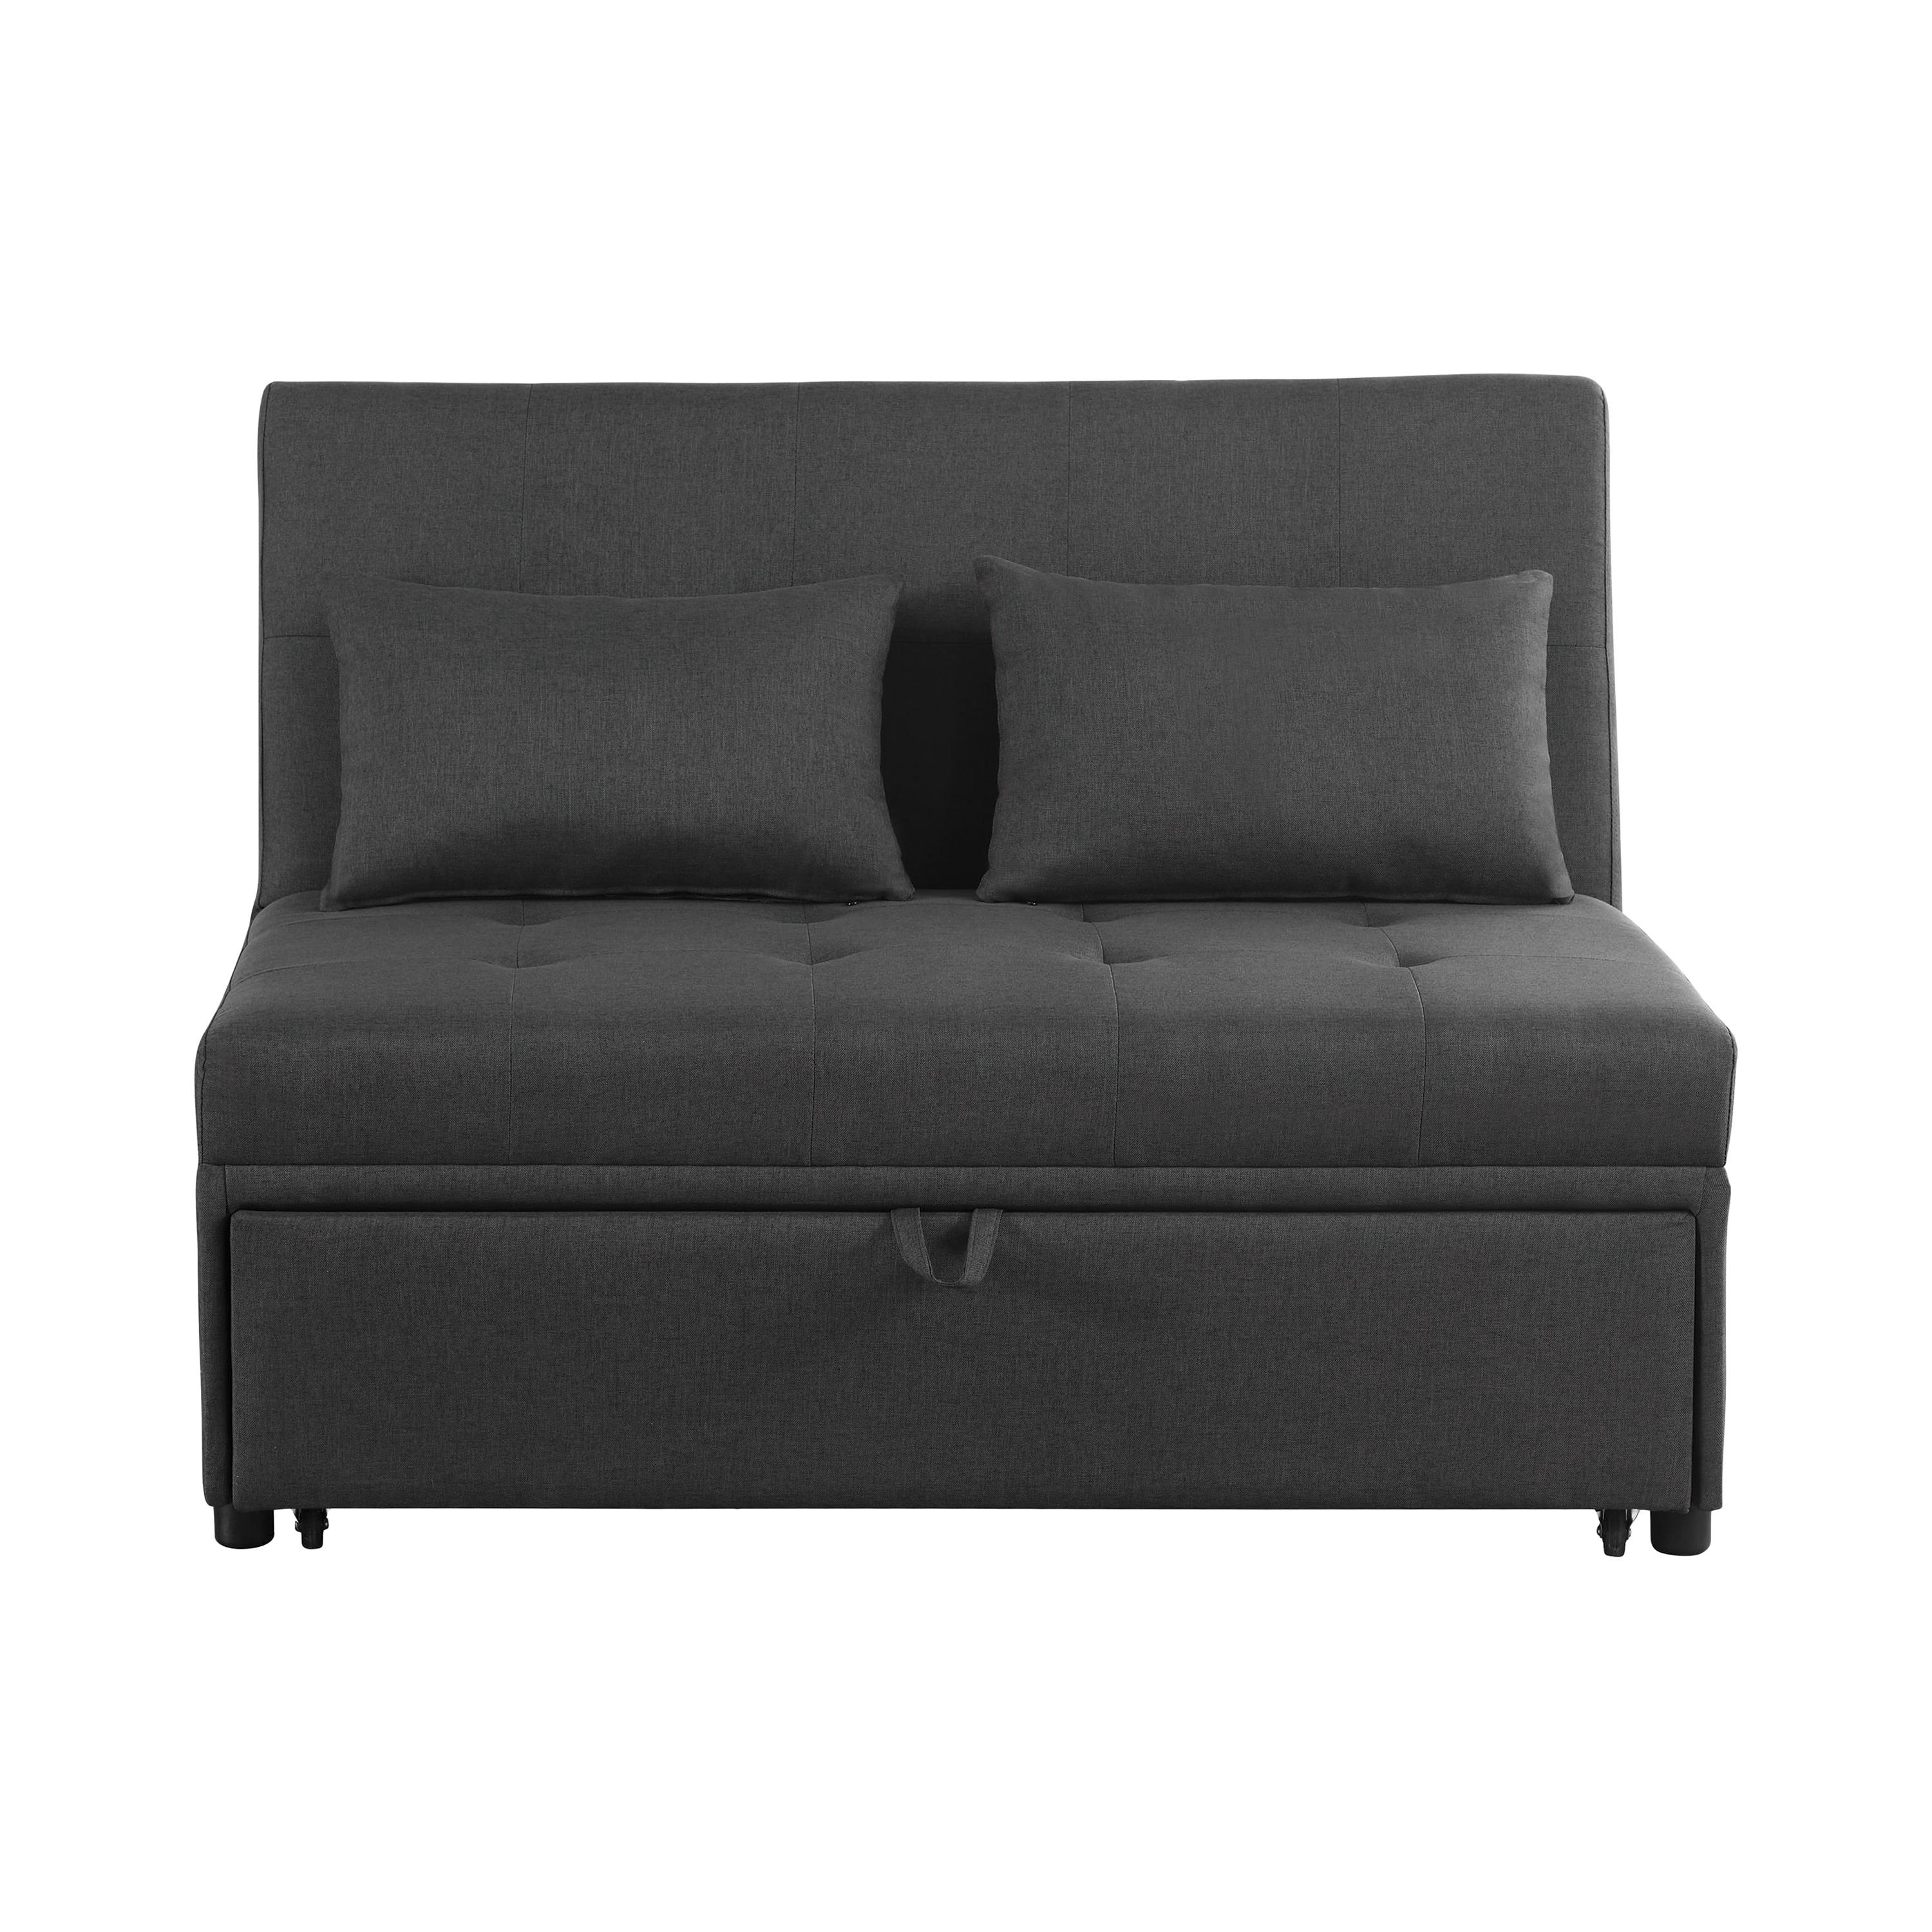 Contemporary Sofa bed 360092 Lance 360092 in Gray Fabric